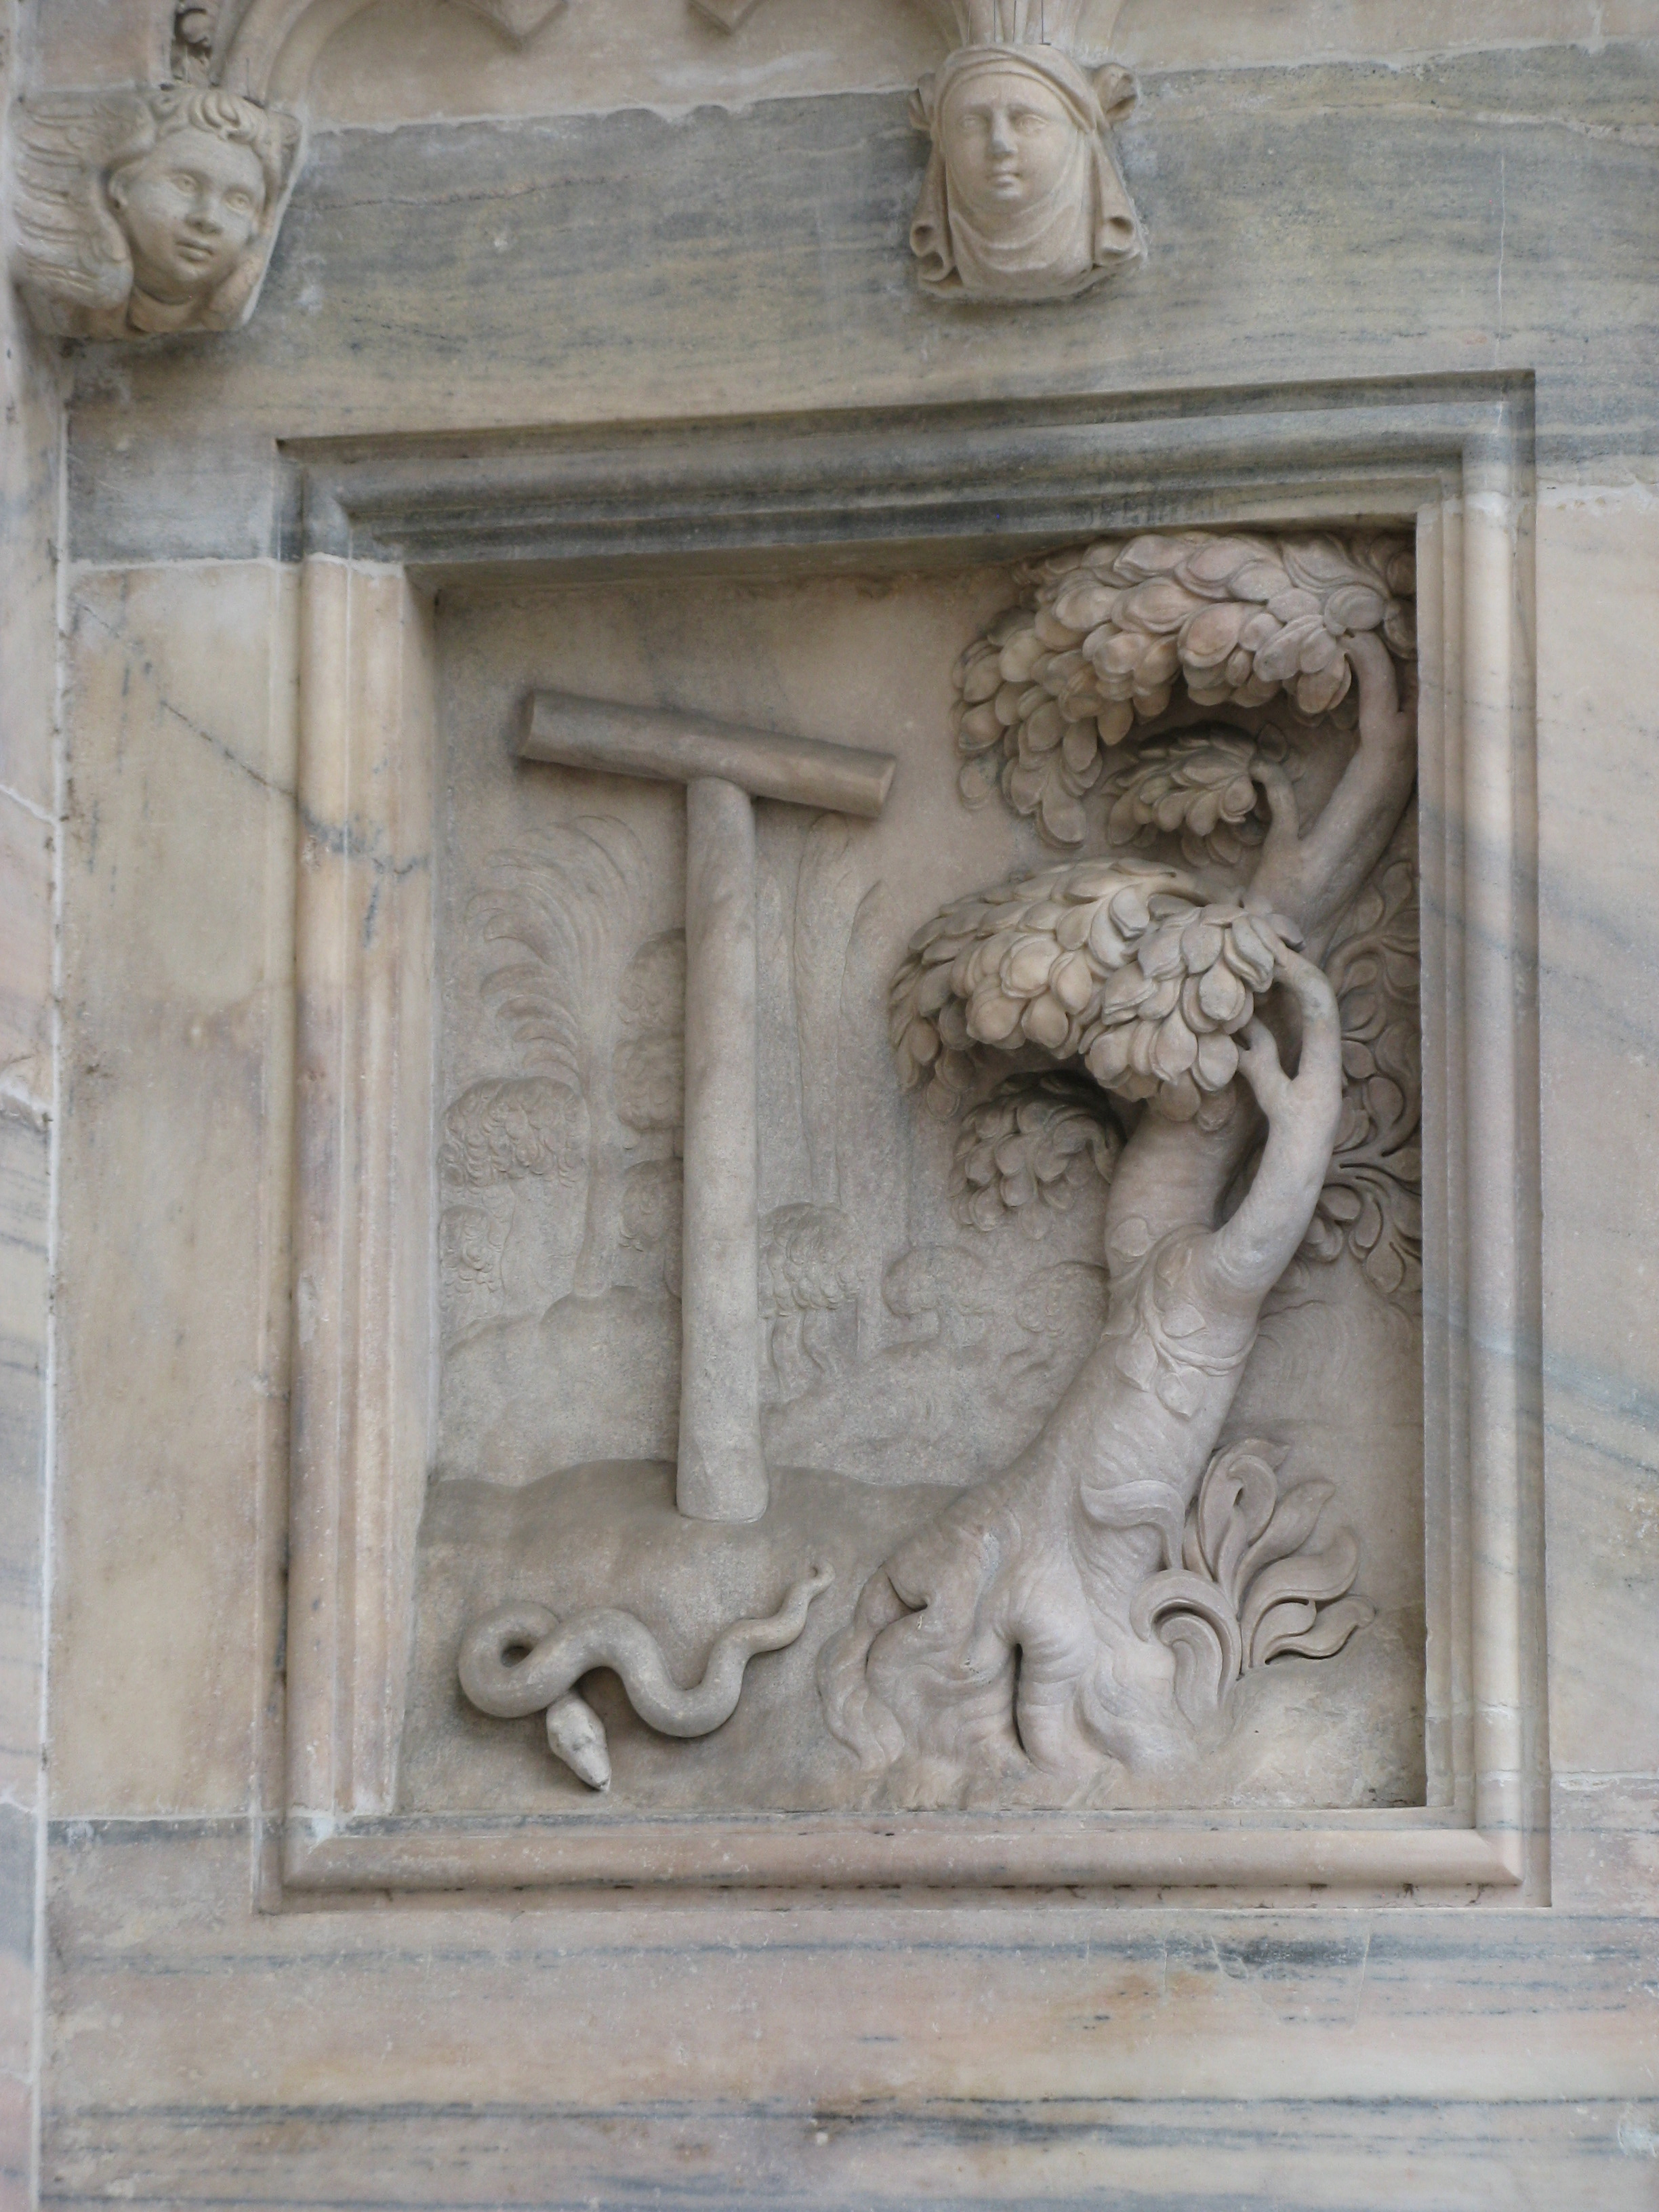 A relief at Exterior of the Duomo (Milan) -Tree of Knowledge and Tree of the Cross of Christ By Yair Haklai (Own work) [CC BY-SA 3.0 (http://creativecommons.org/licenses/by-sa/3.0) or GFDL (http://www.gnu.org/copyleft/fdl.html)], via Wikimedia Commons